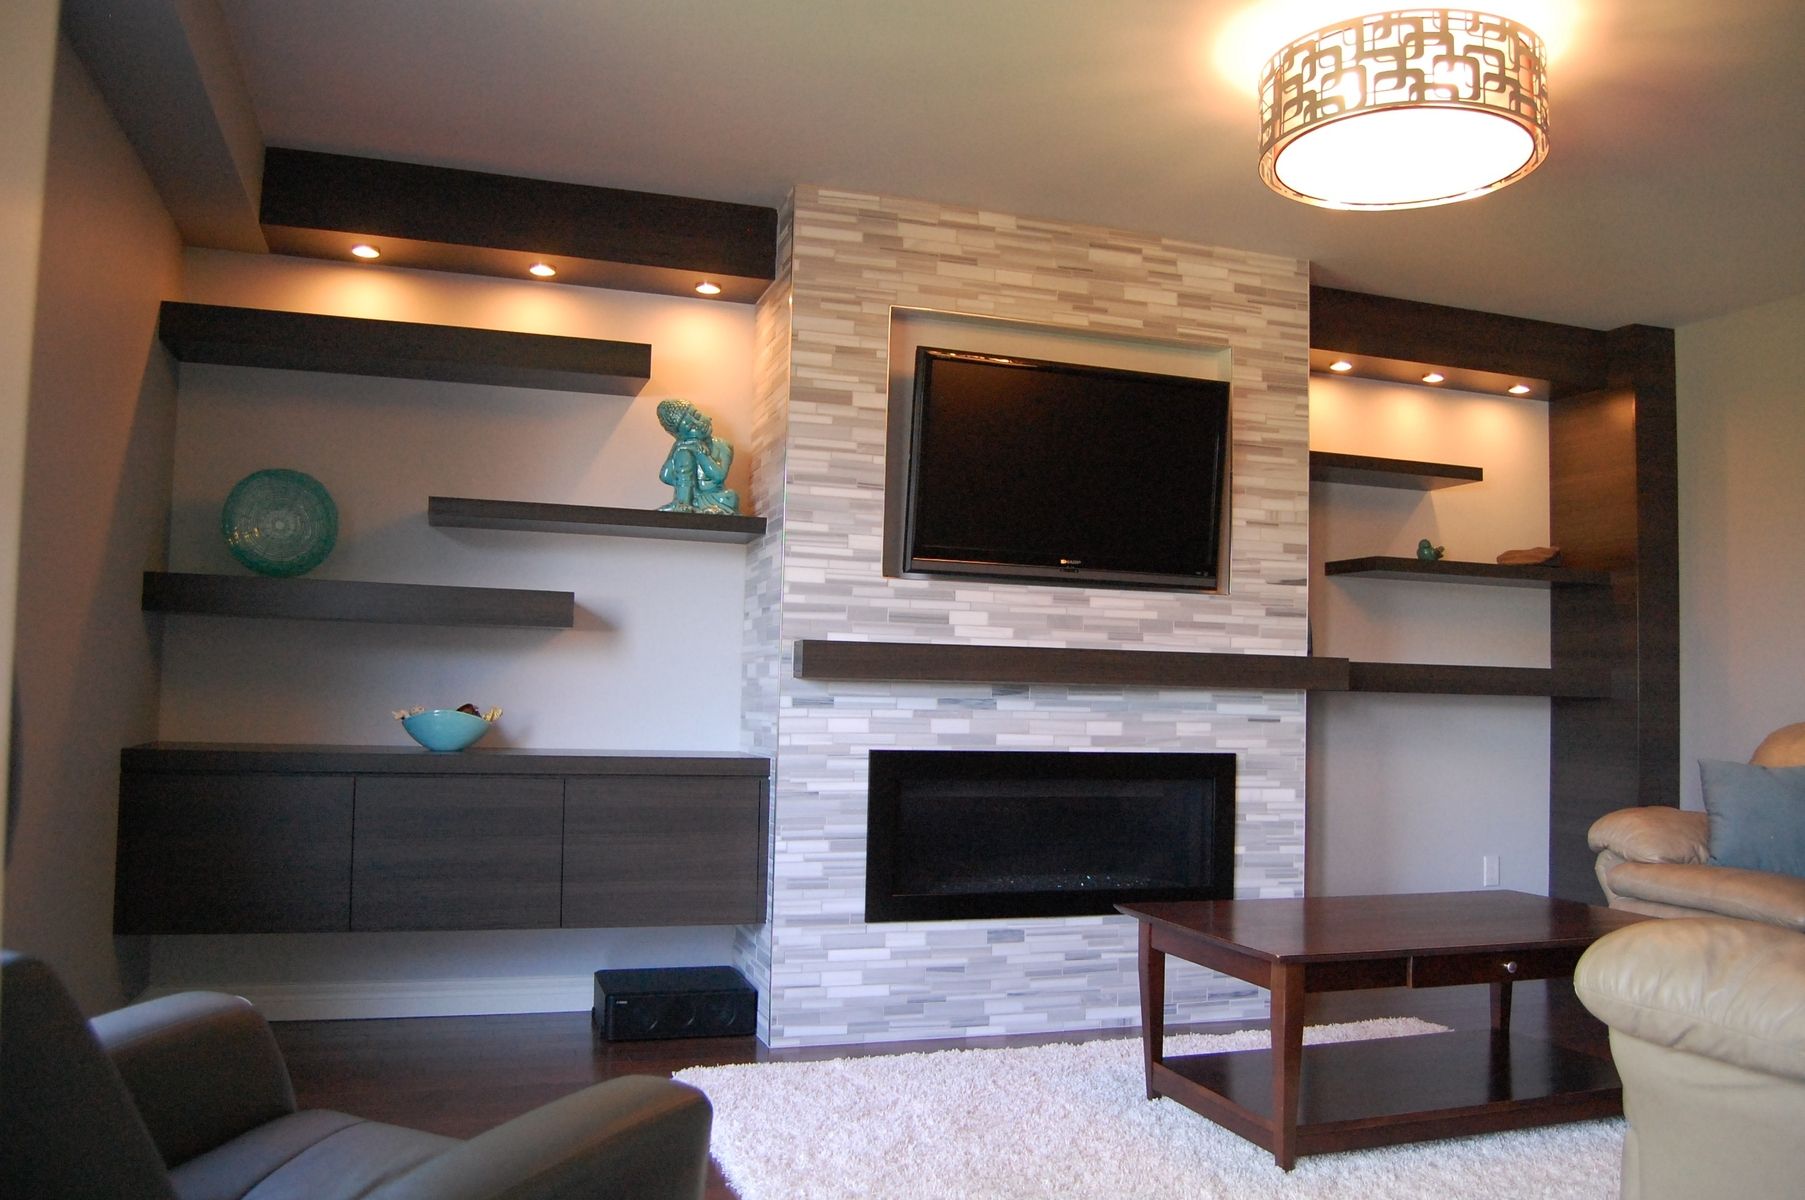 Electric Fireplace with Bookshelves Elegant Custom Modern Wall Unit Made Pletely From A Printed